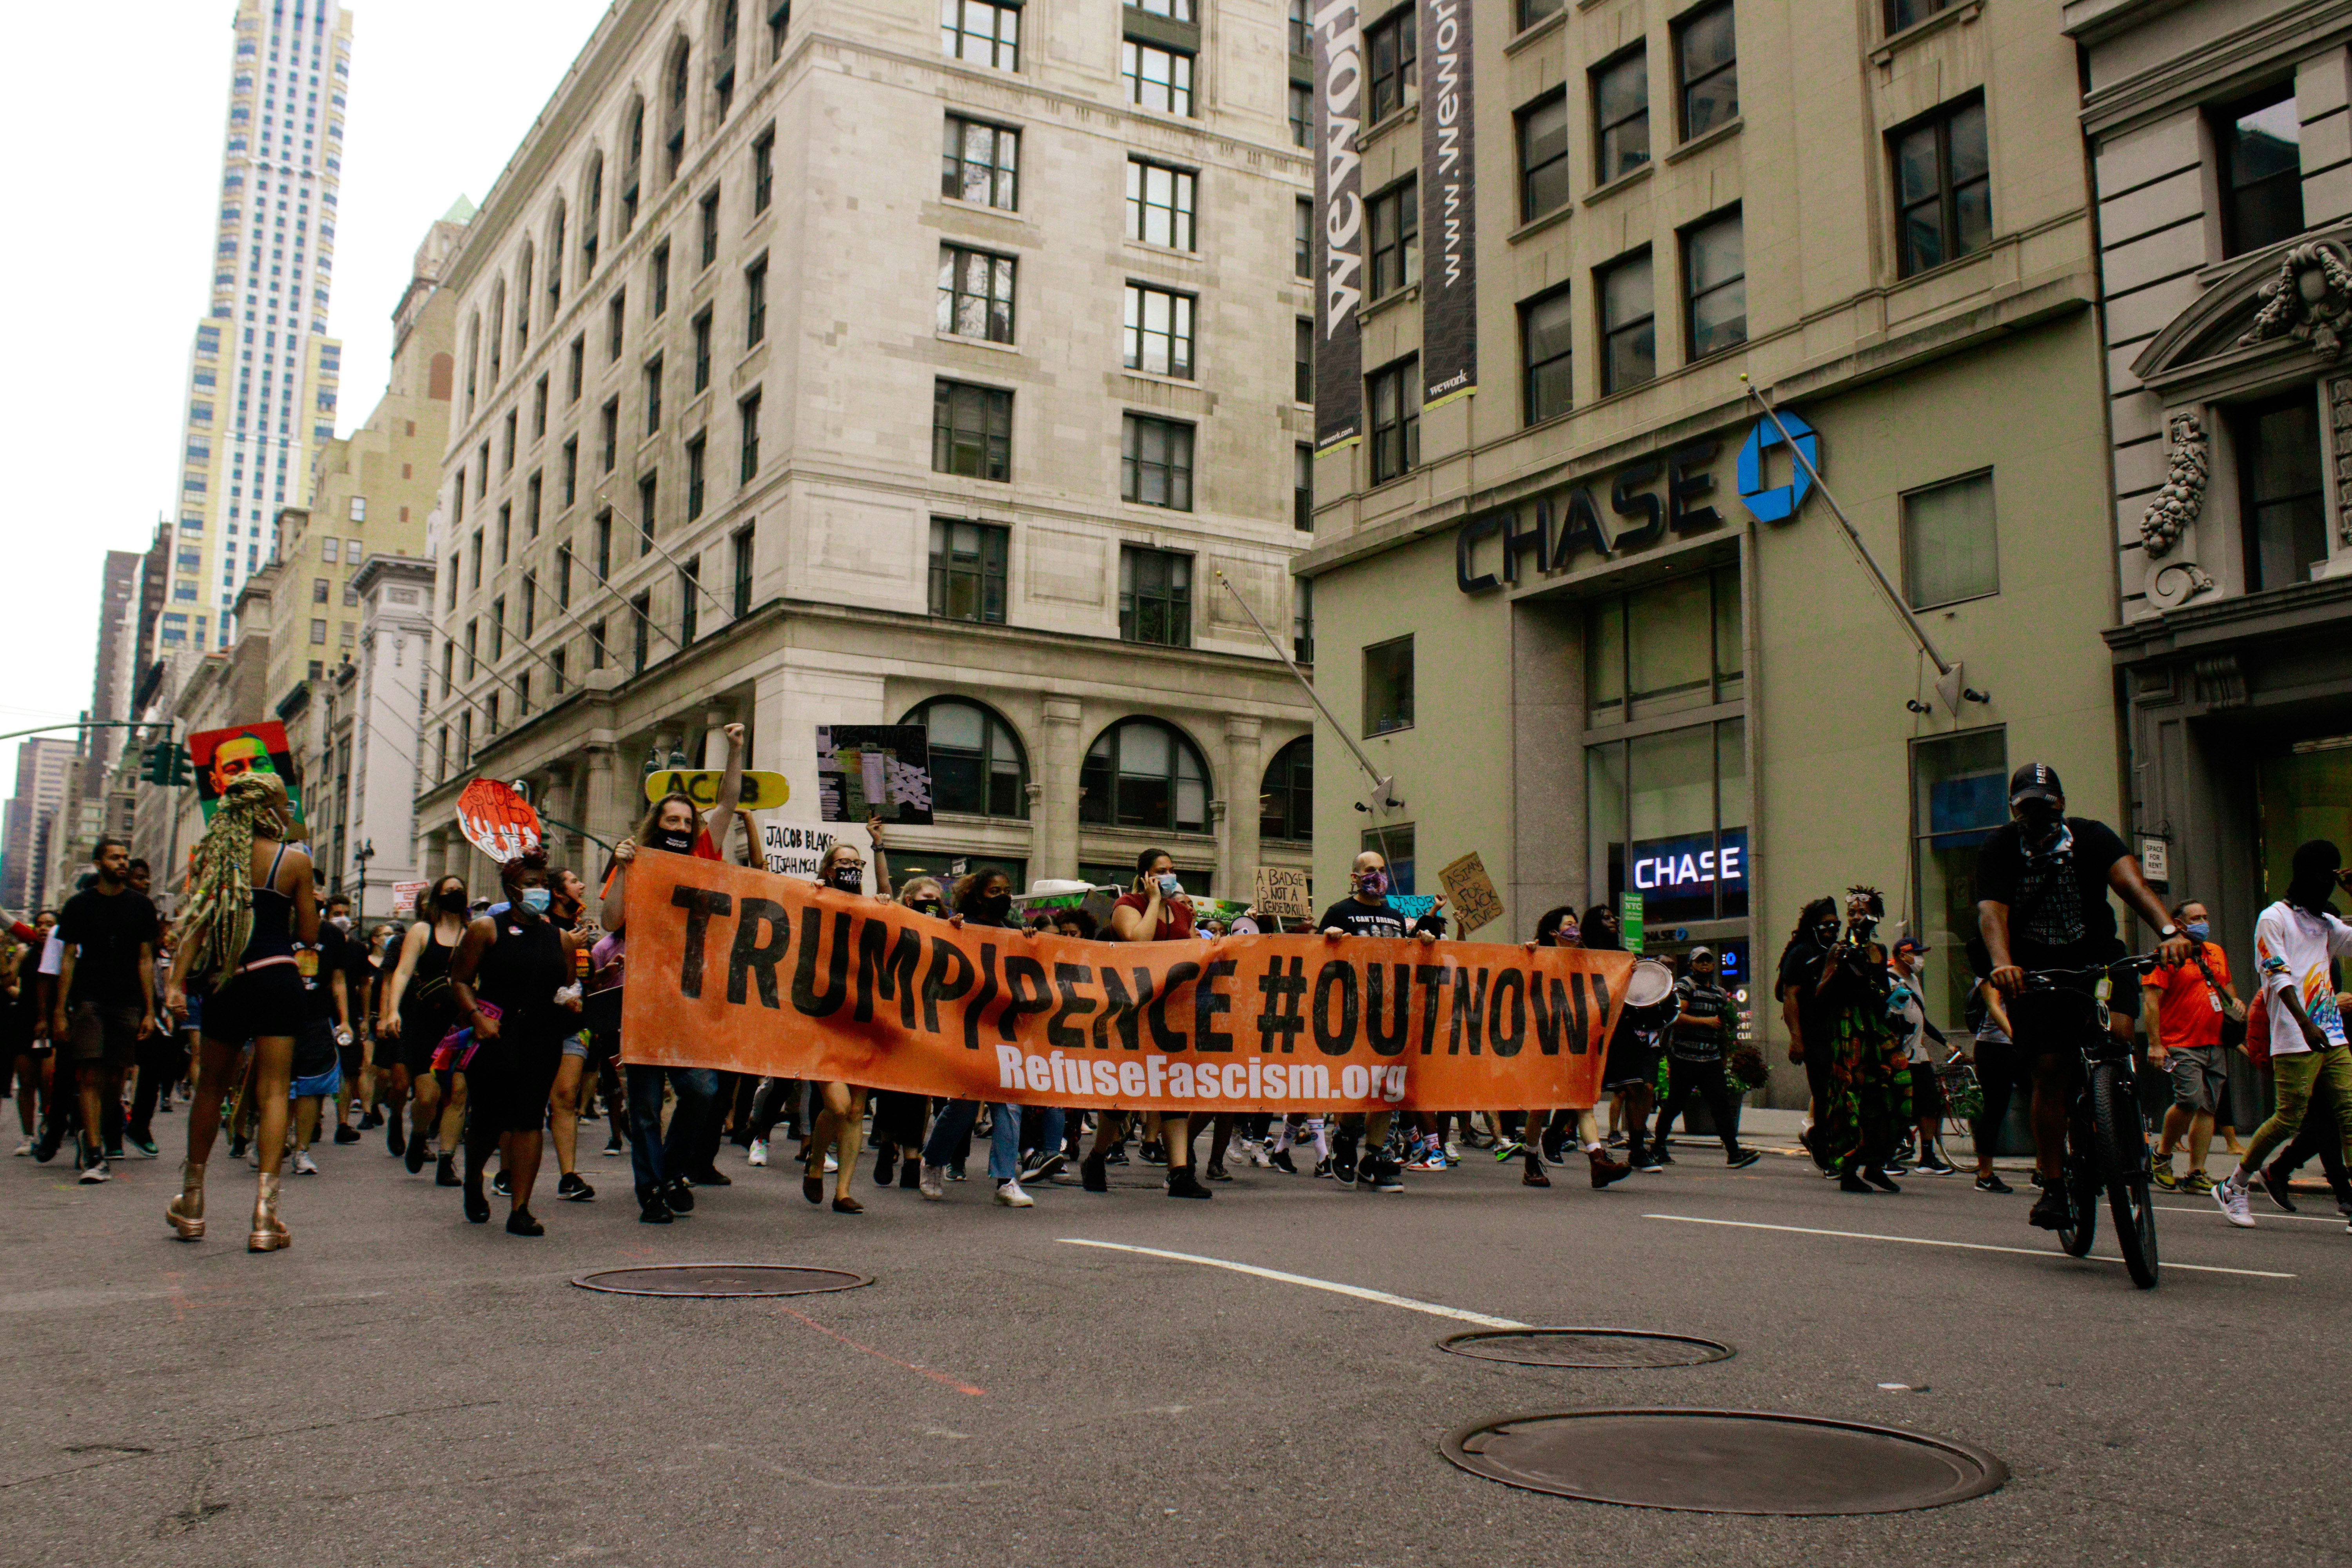 people walking on street with yellow and black banner during daytime